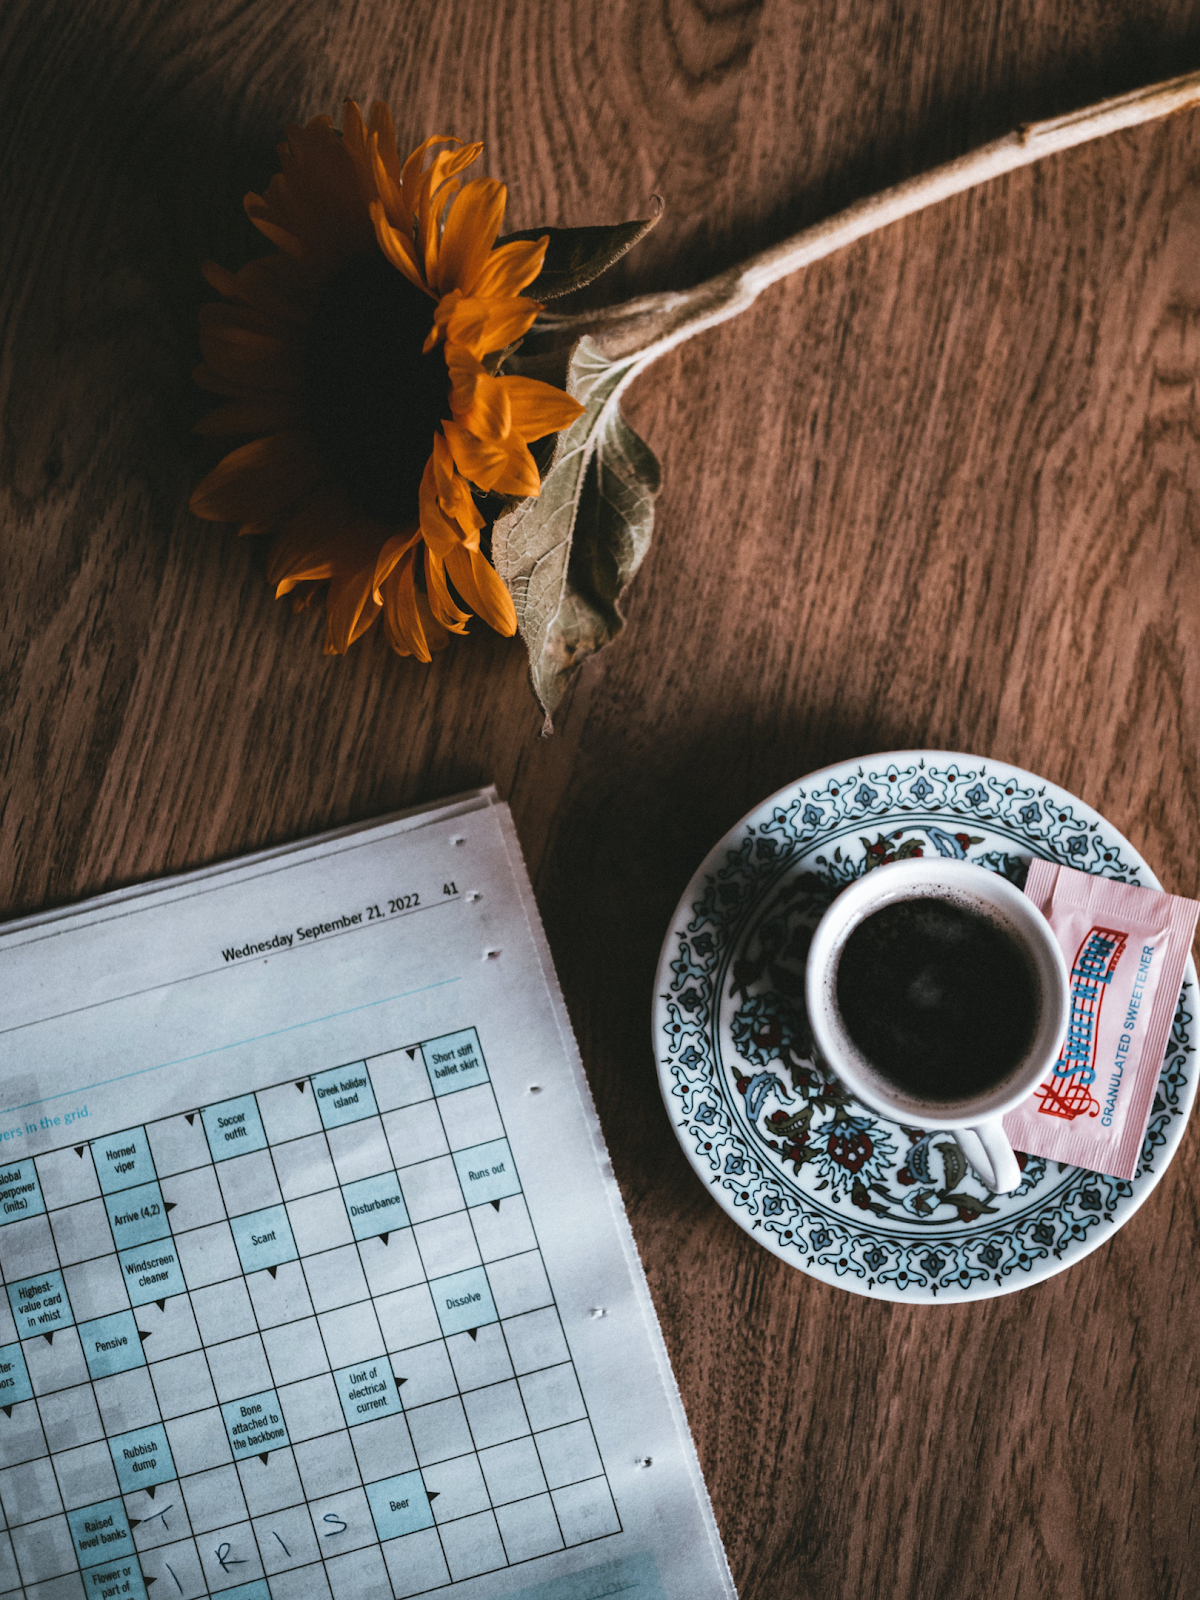 Crossword puzzle with coffee cup and sunflower